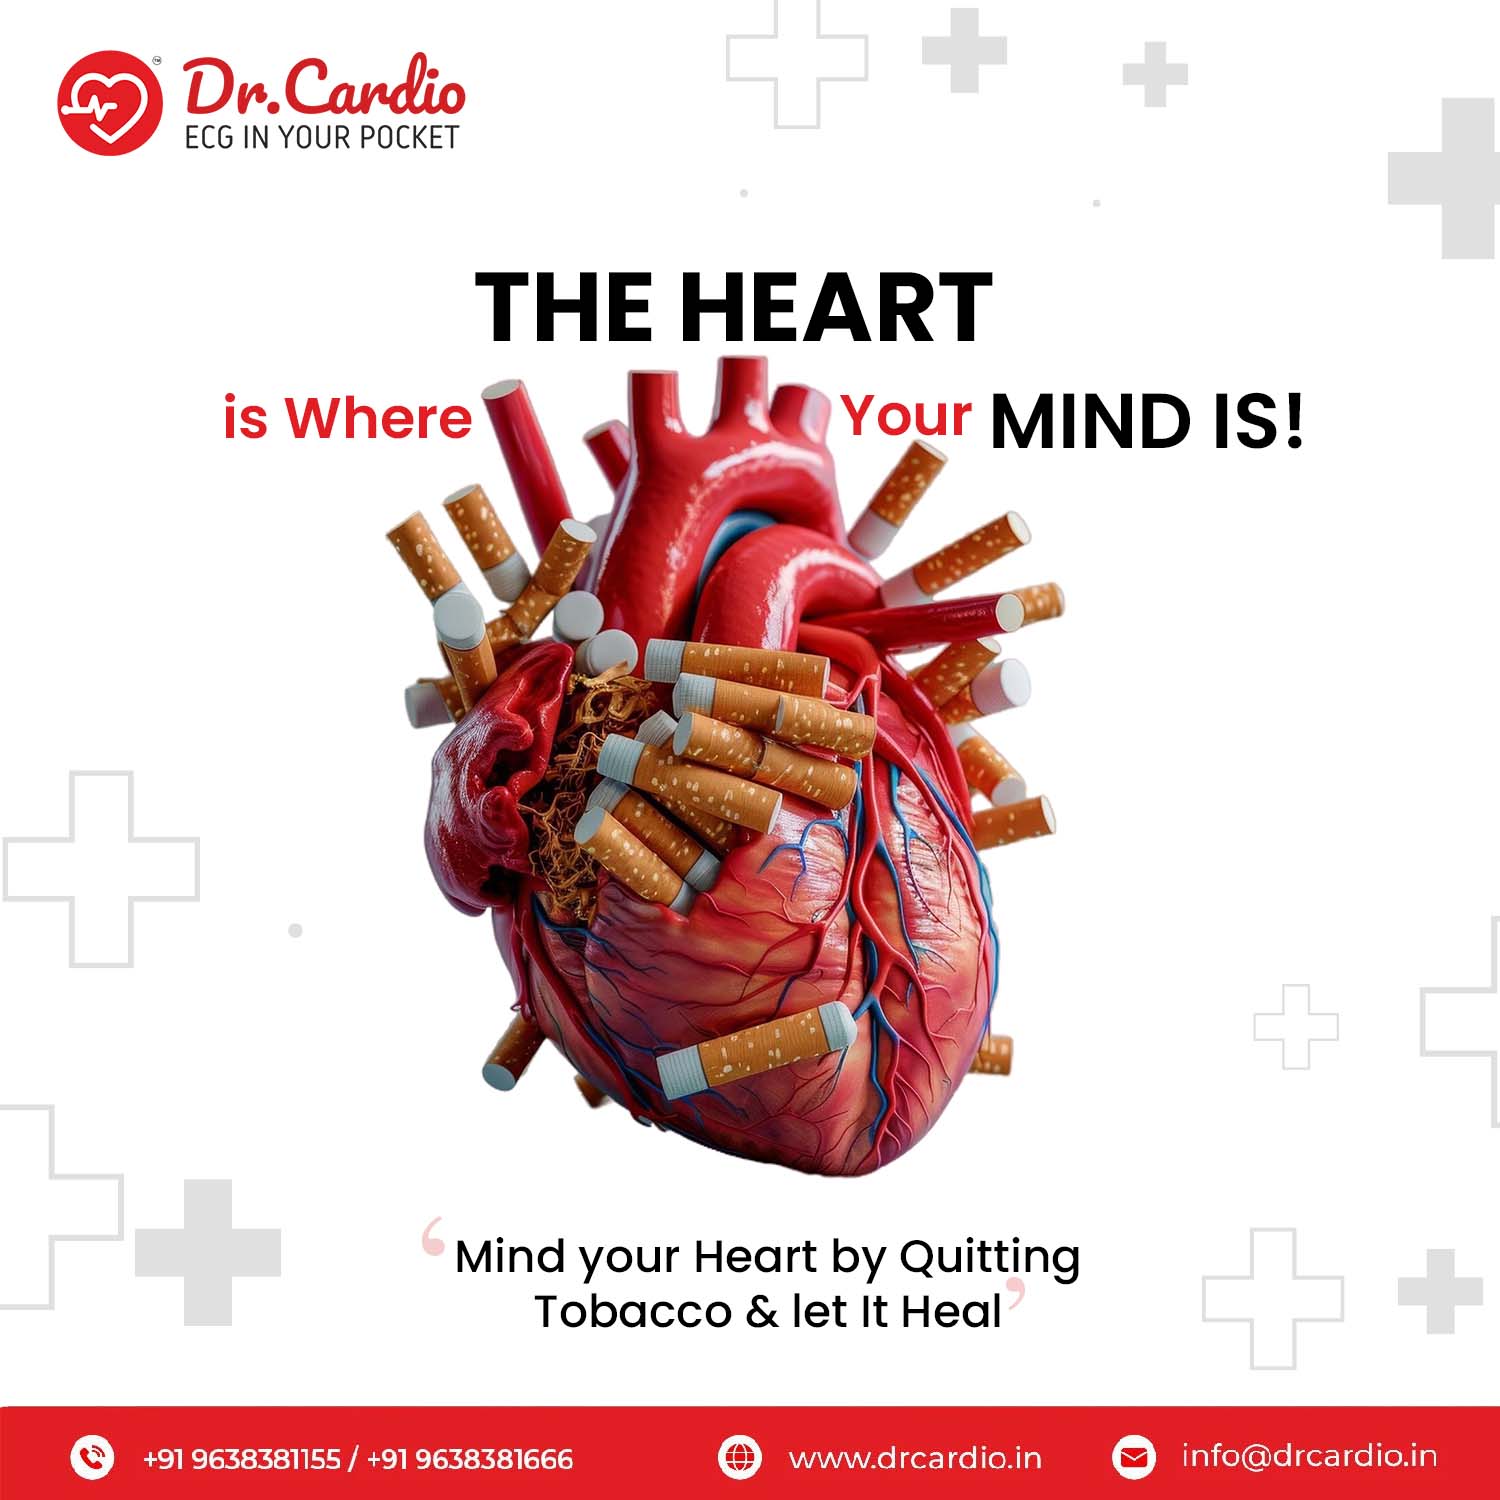 Make a heart-healthy choice today Quit tobacco